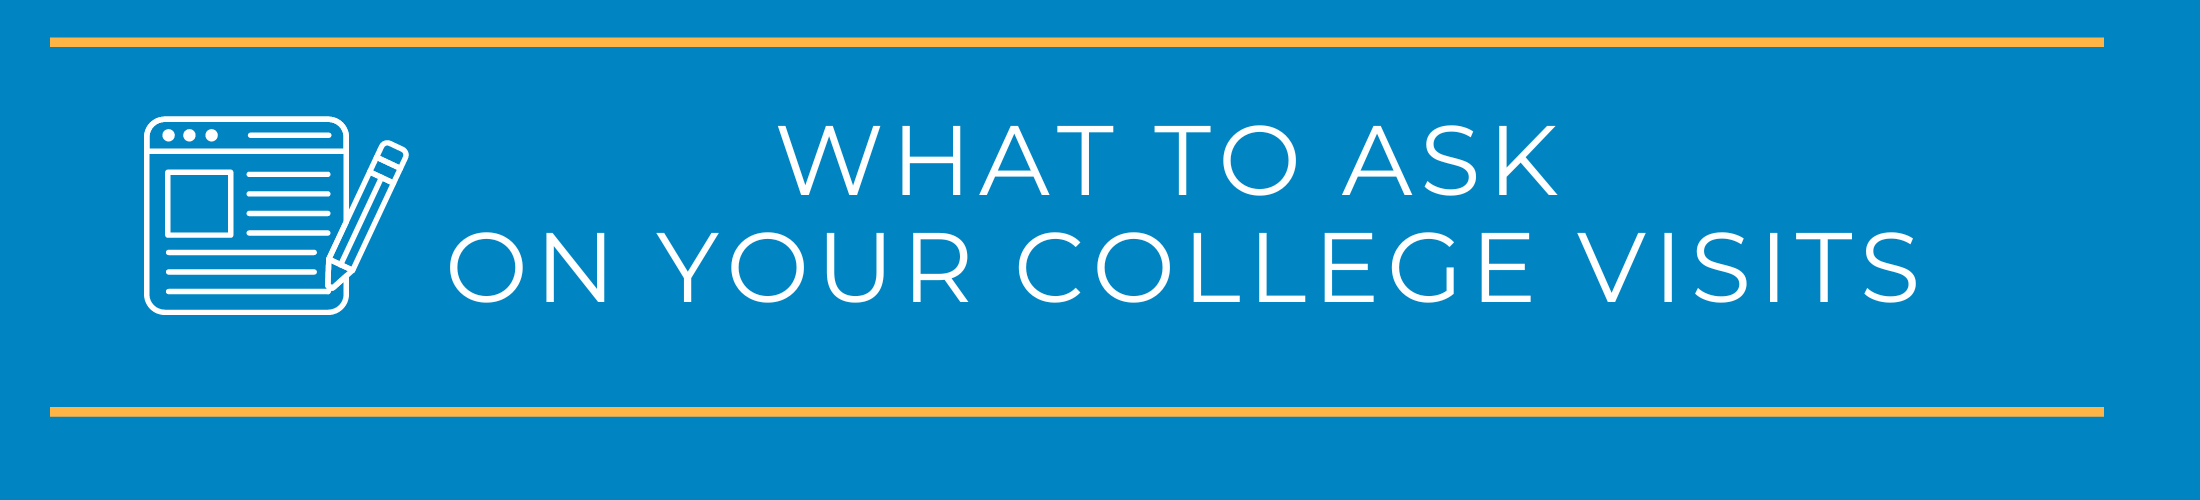 What to Ask on Your College Visits